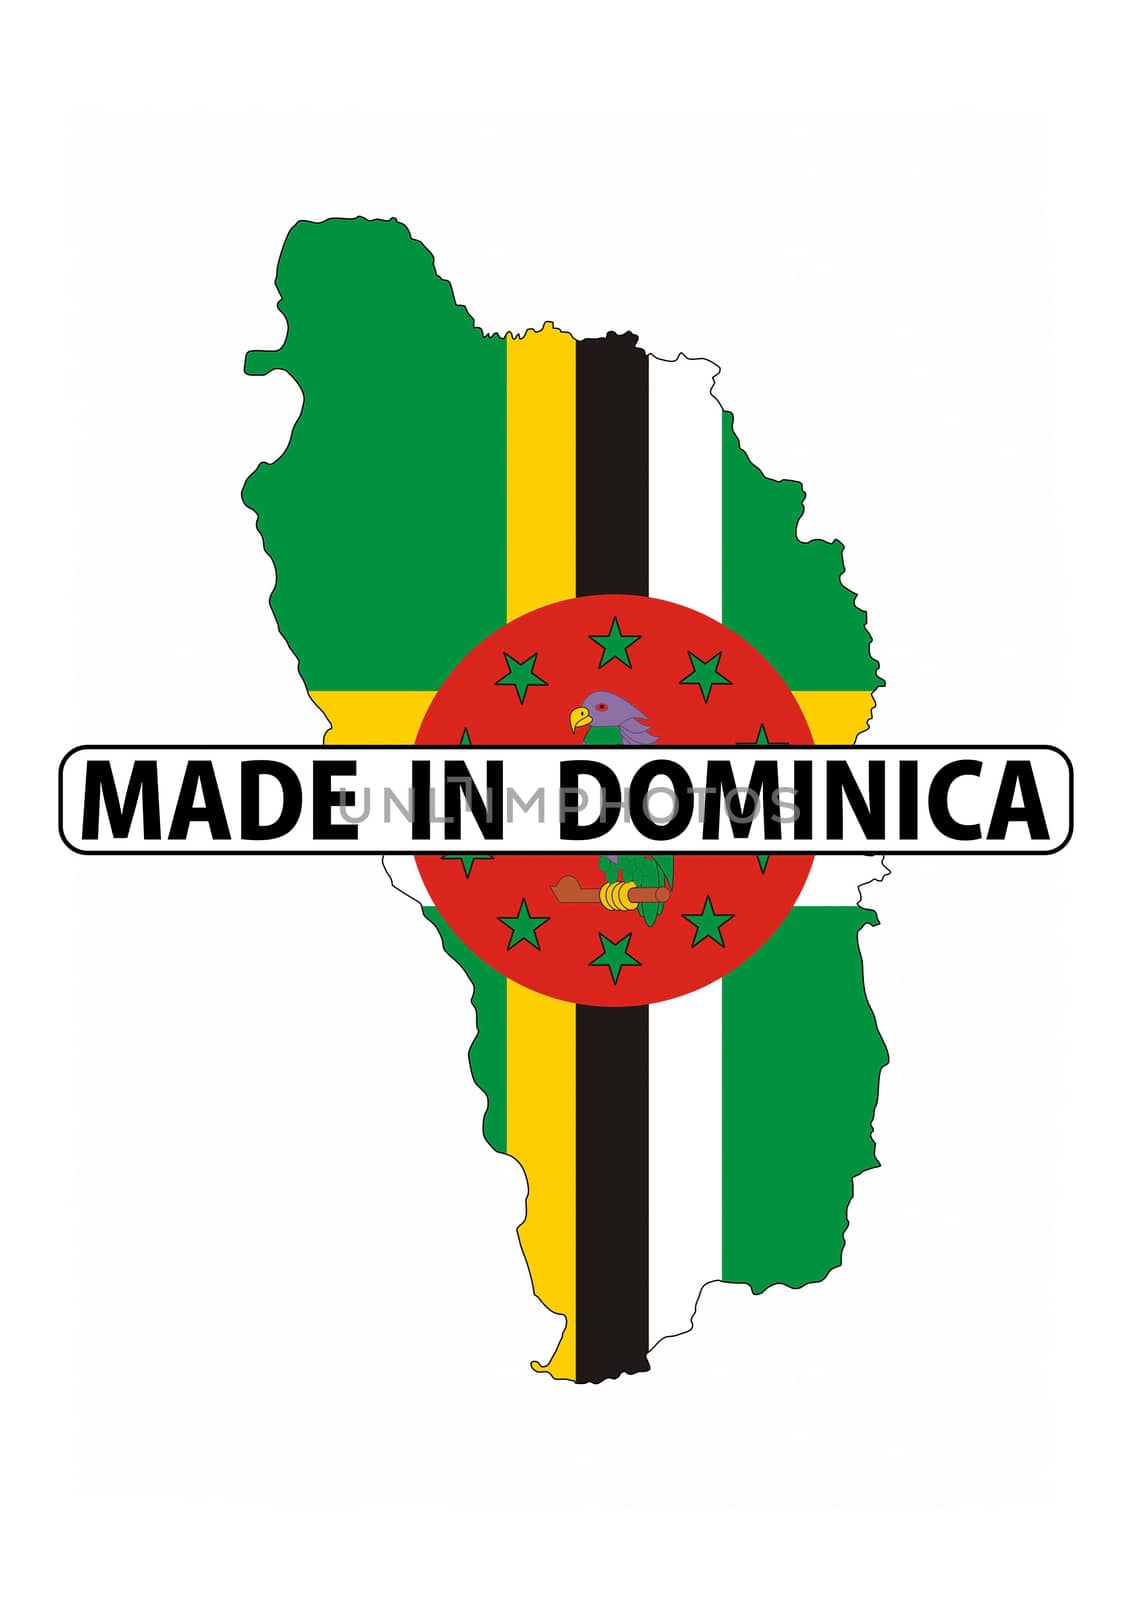 made in dominica by tony4urban